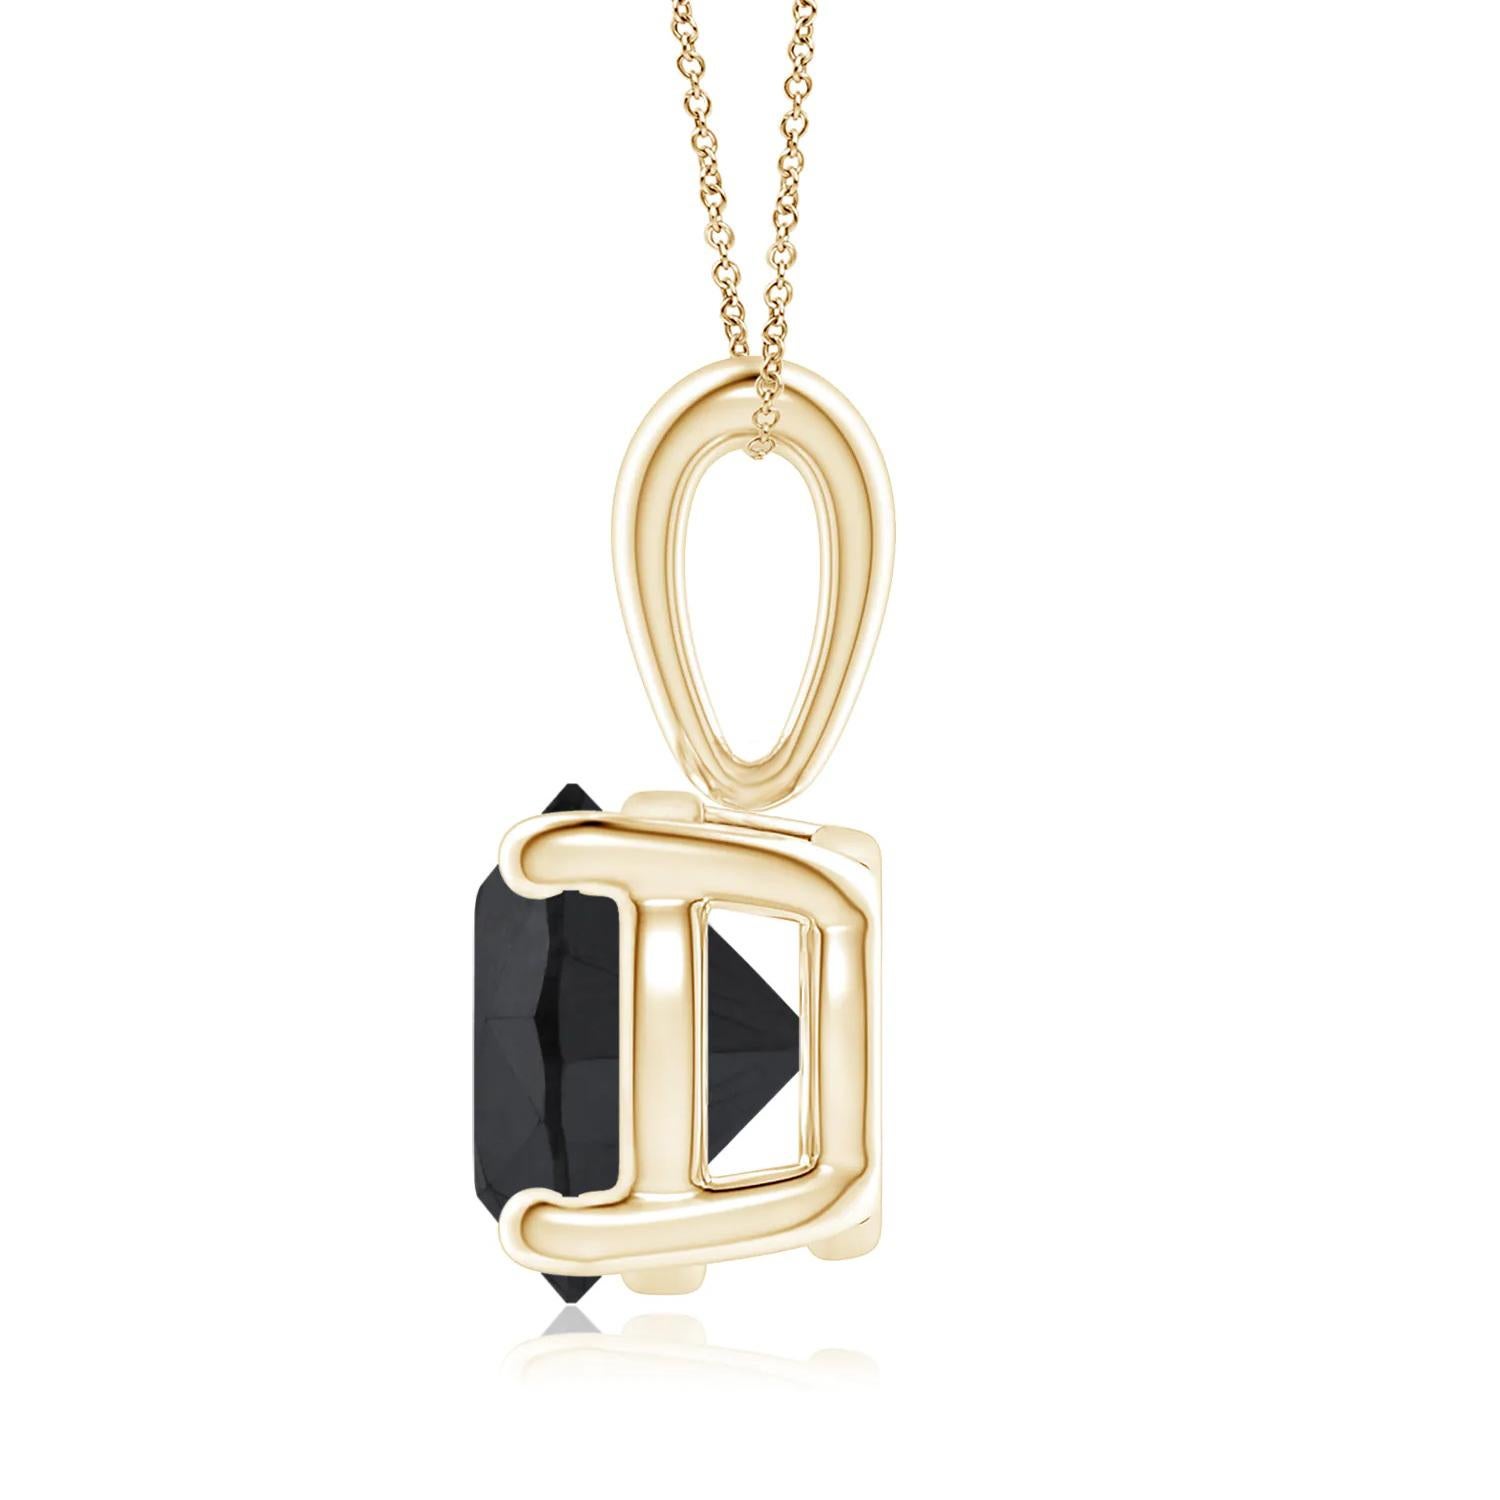 Surprise a special woman in your life with this breathtaking, statement hand crafted solitaire black diamond necklace. This eye-catching pendant necklace features a 1.6 carat round cut black diamond, measuring 6.80 x 6.79 x 5.23 mm set in 14k yellow